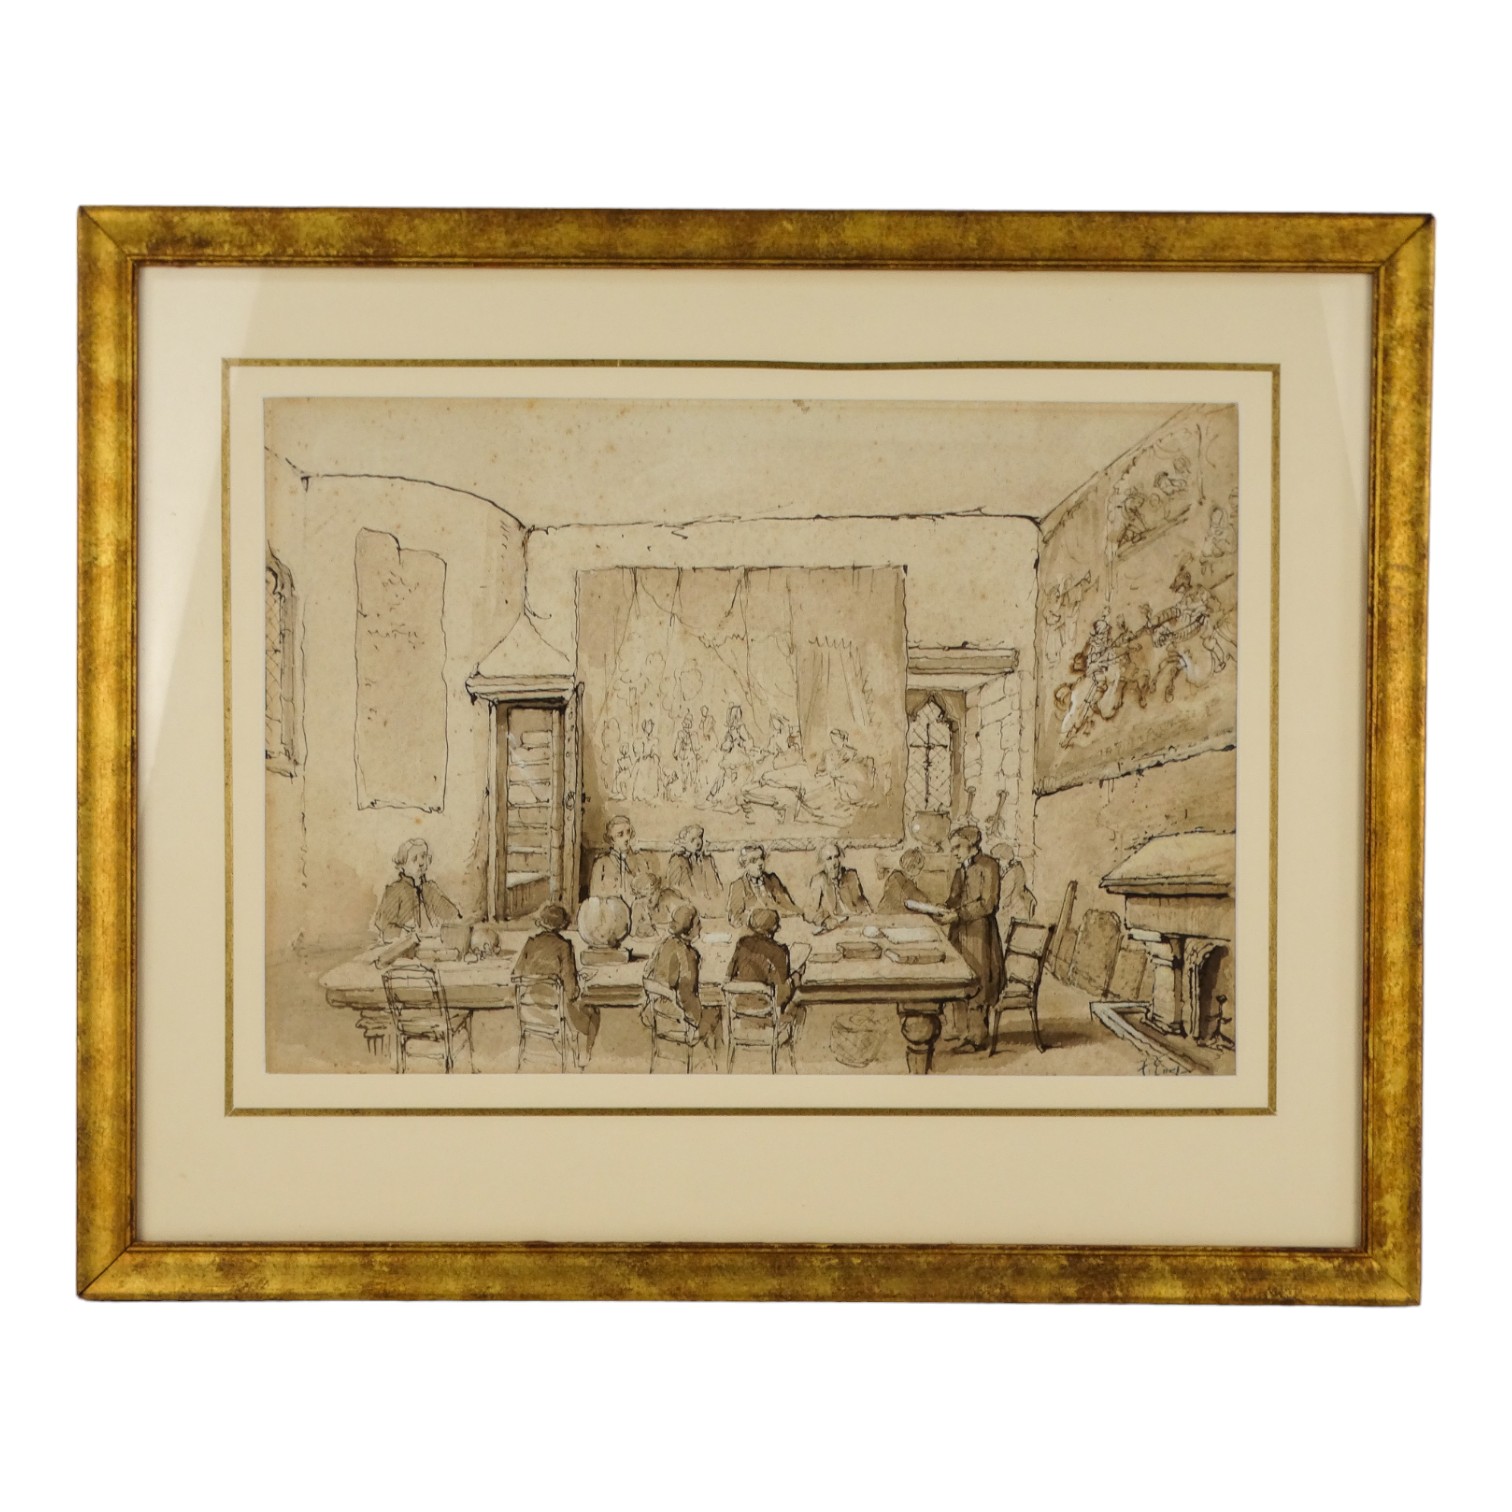 T EARL (British 19th Century) Meeting at the Chapter House Chichester Pen and wash Signed lower - Image 2 of 4